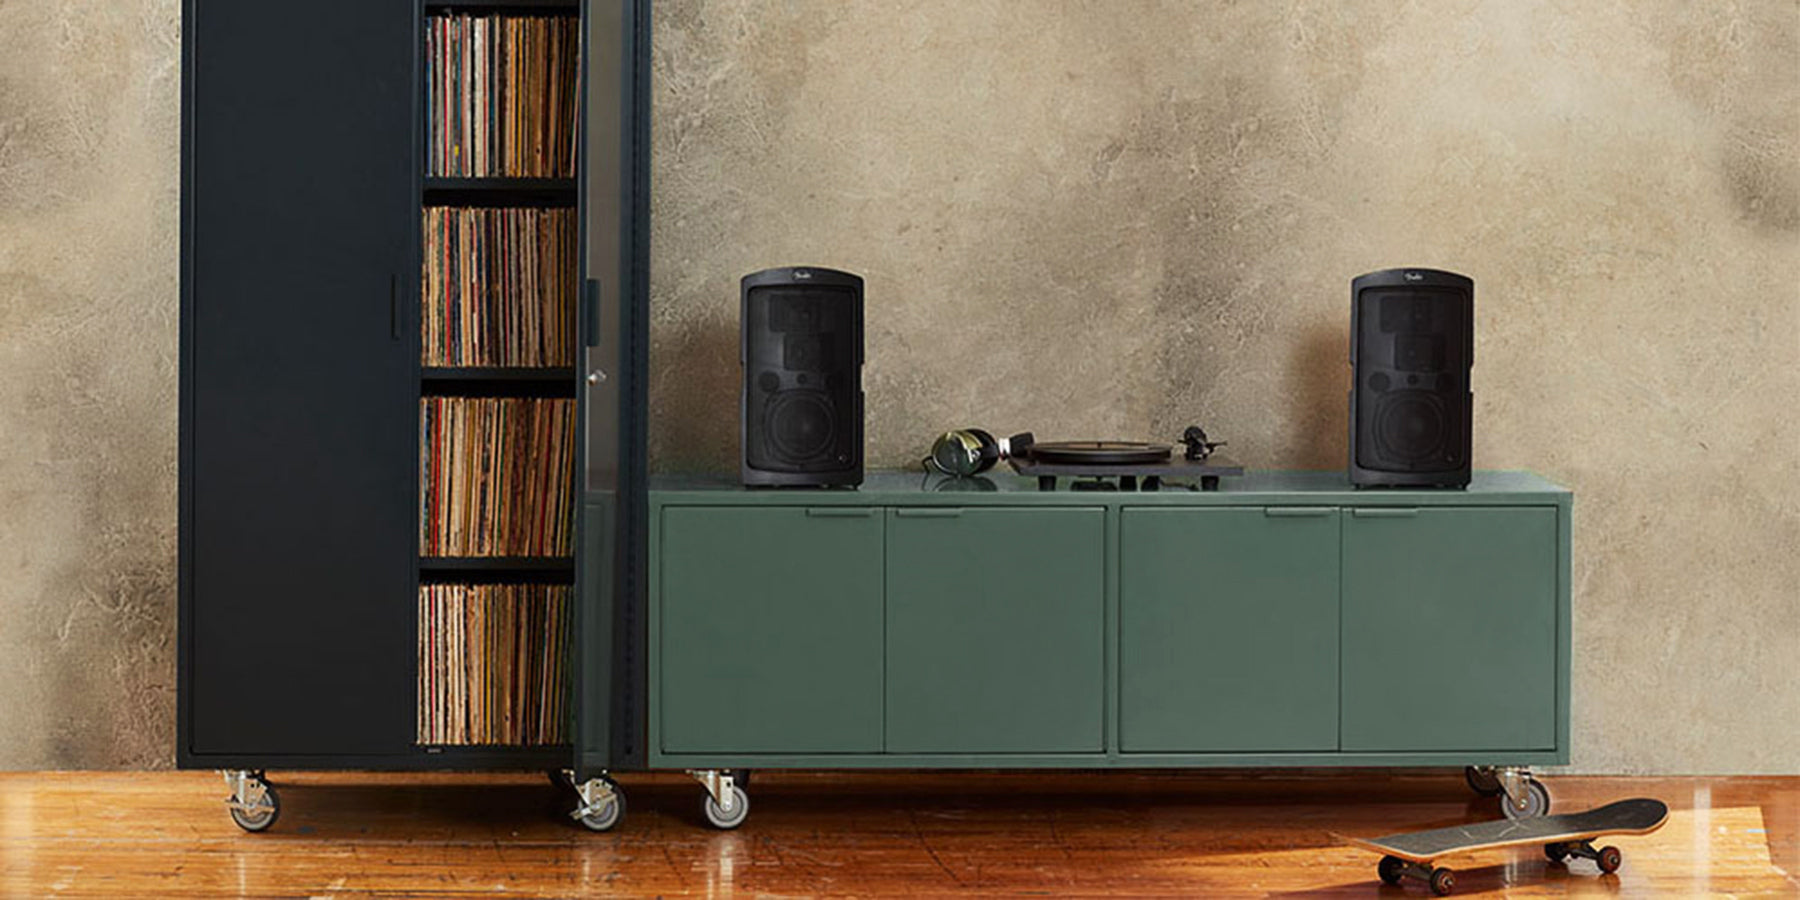 Heartwork Active Duty A/V credenza in deep green with record player and speakers in home setting